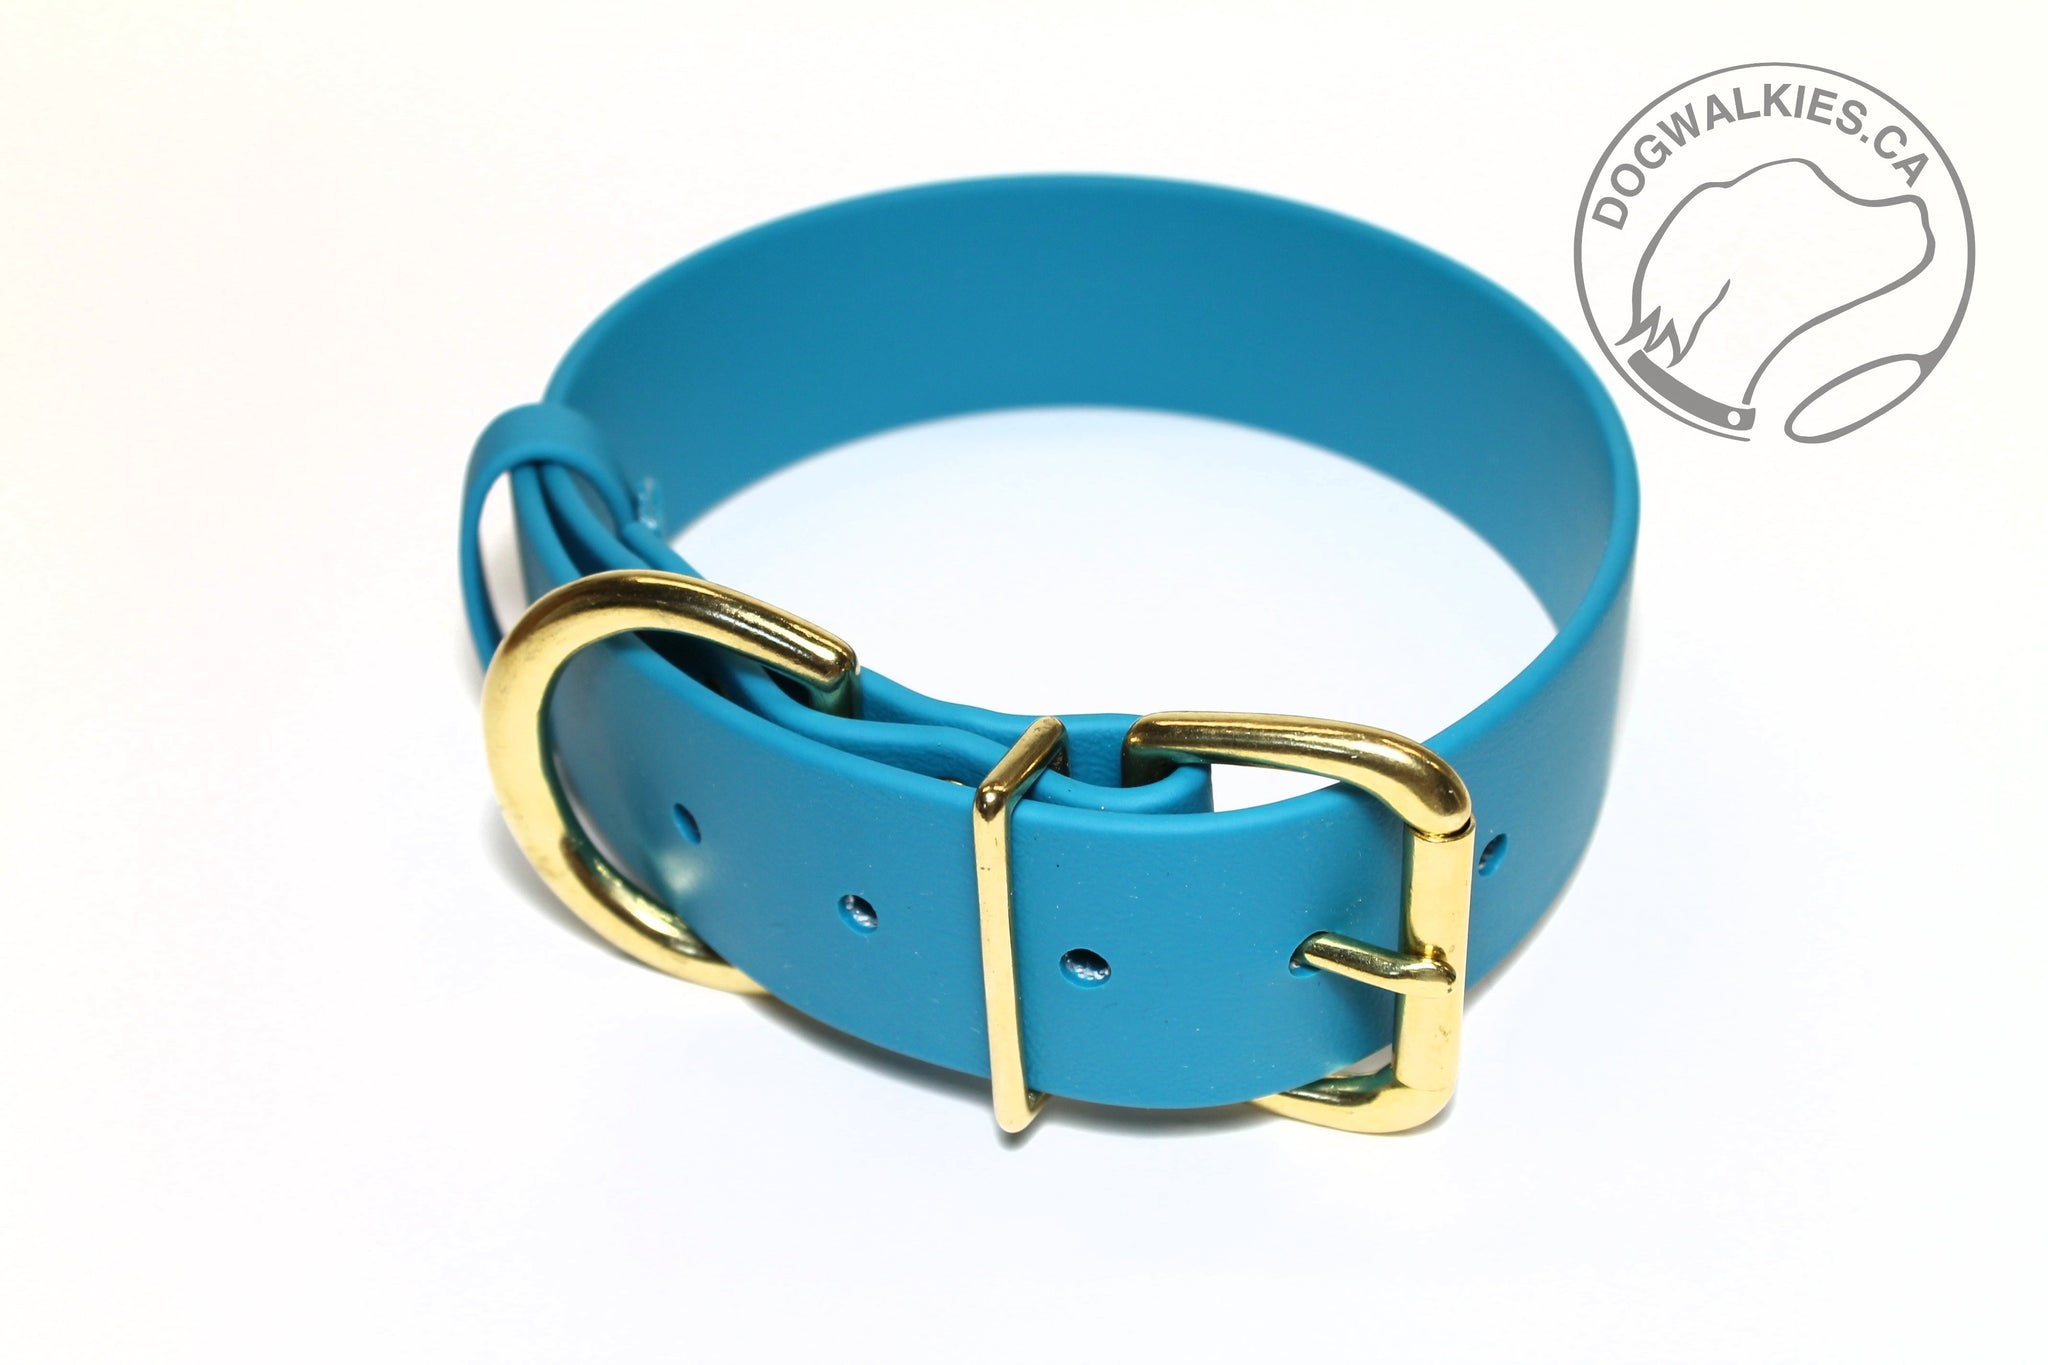 Oasis Blue Biothane Dog Collar - Extra Wide - 1.5 inch (38mm) wide